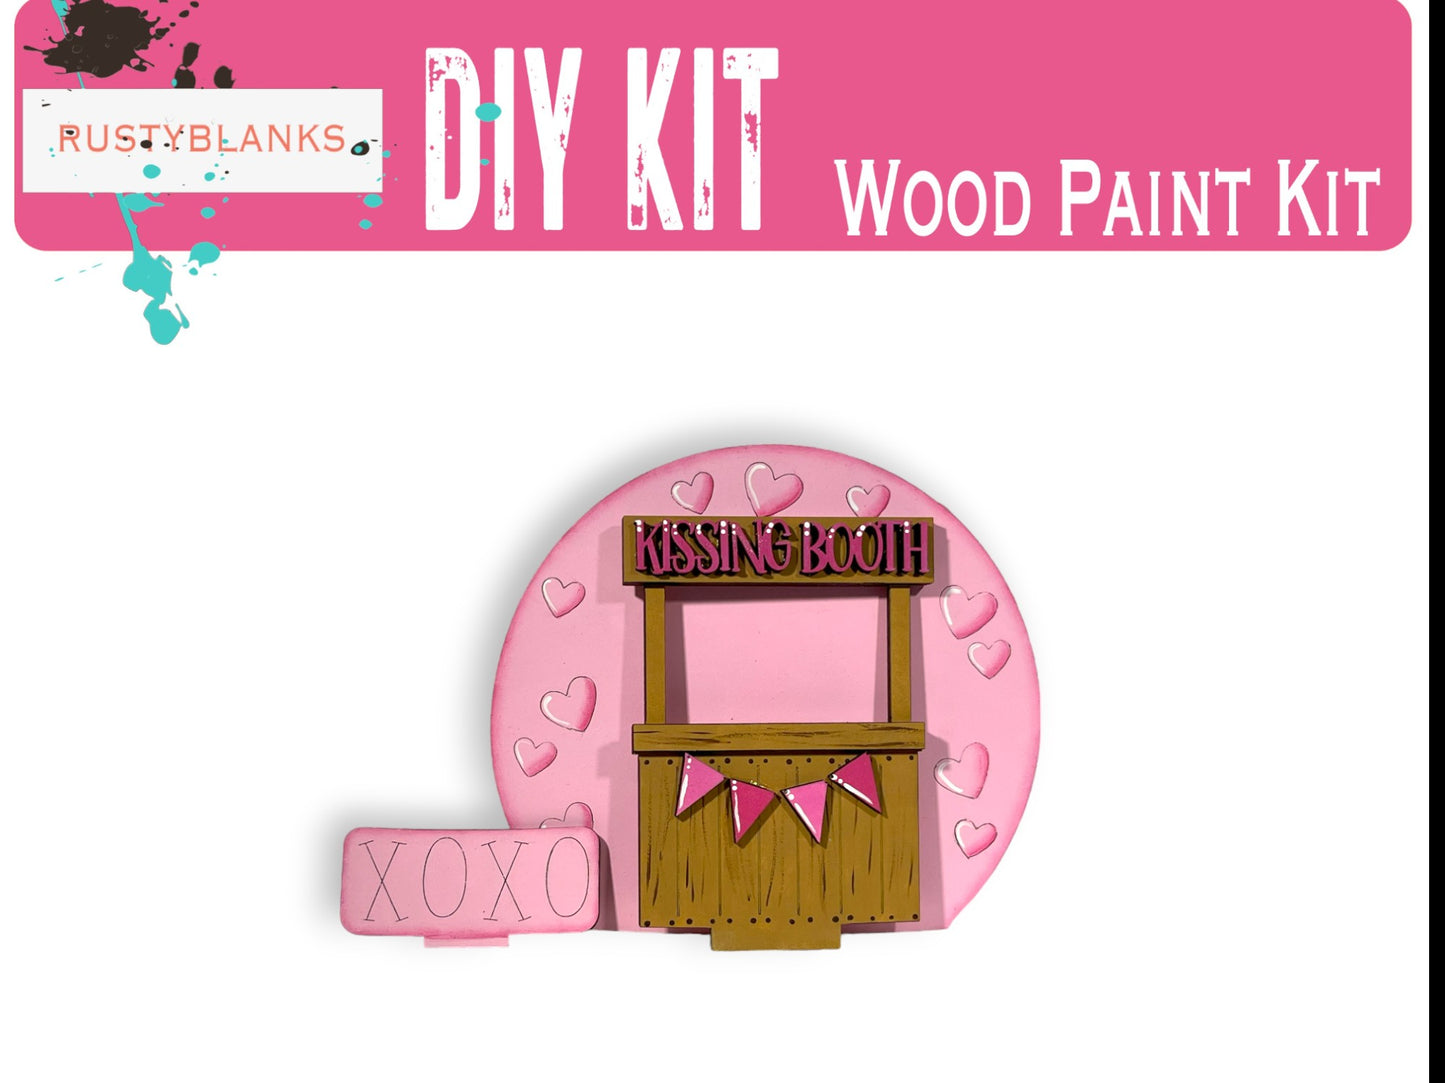 a picture of a pink wooden paint kit